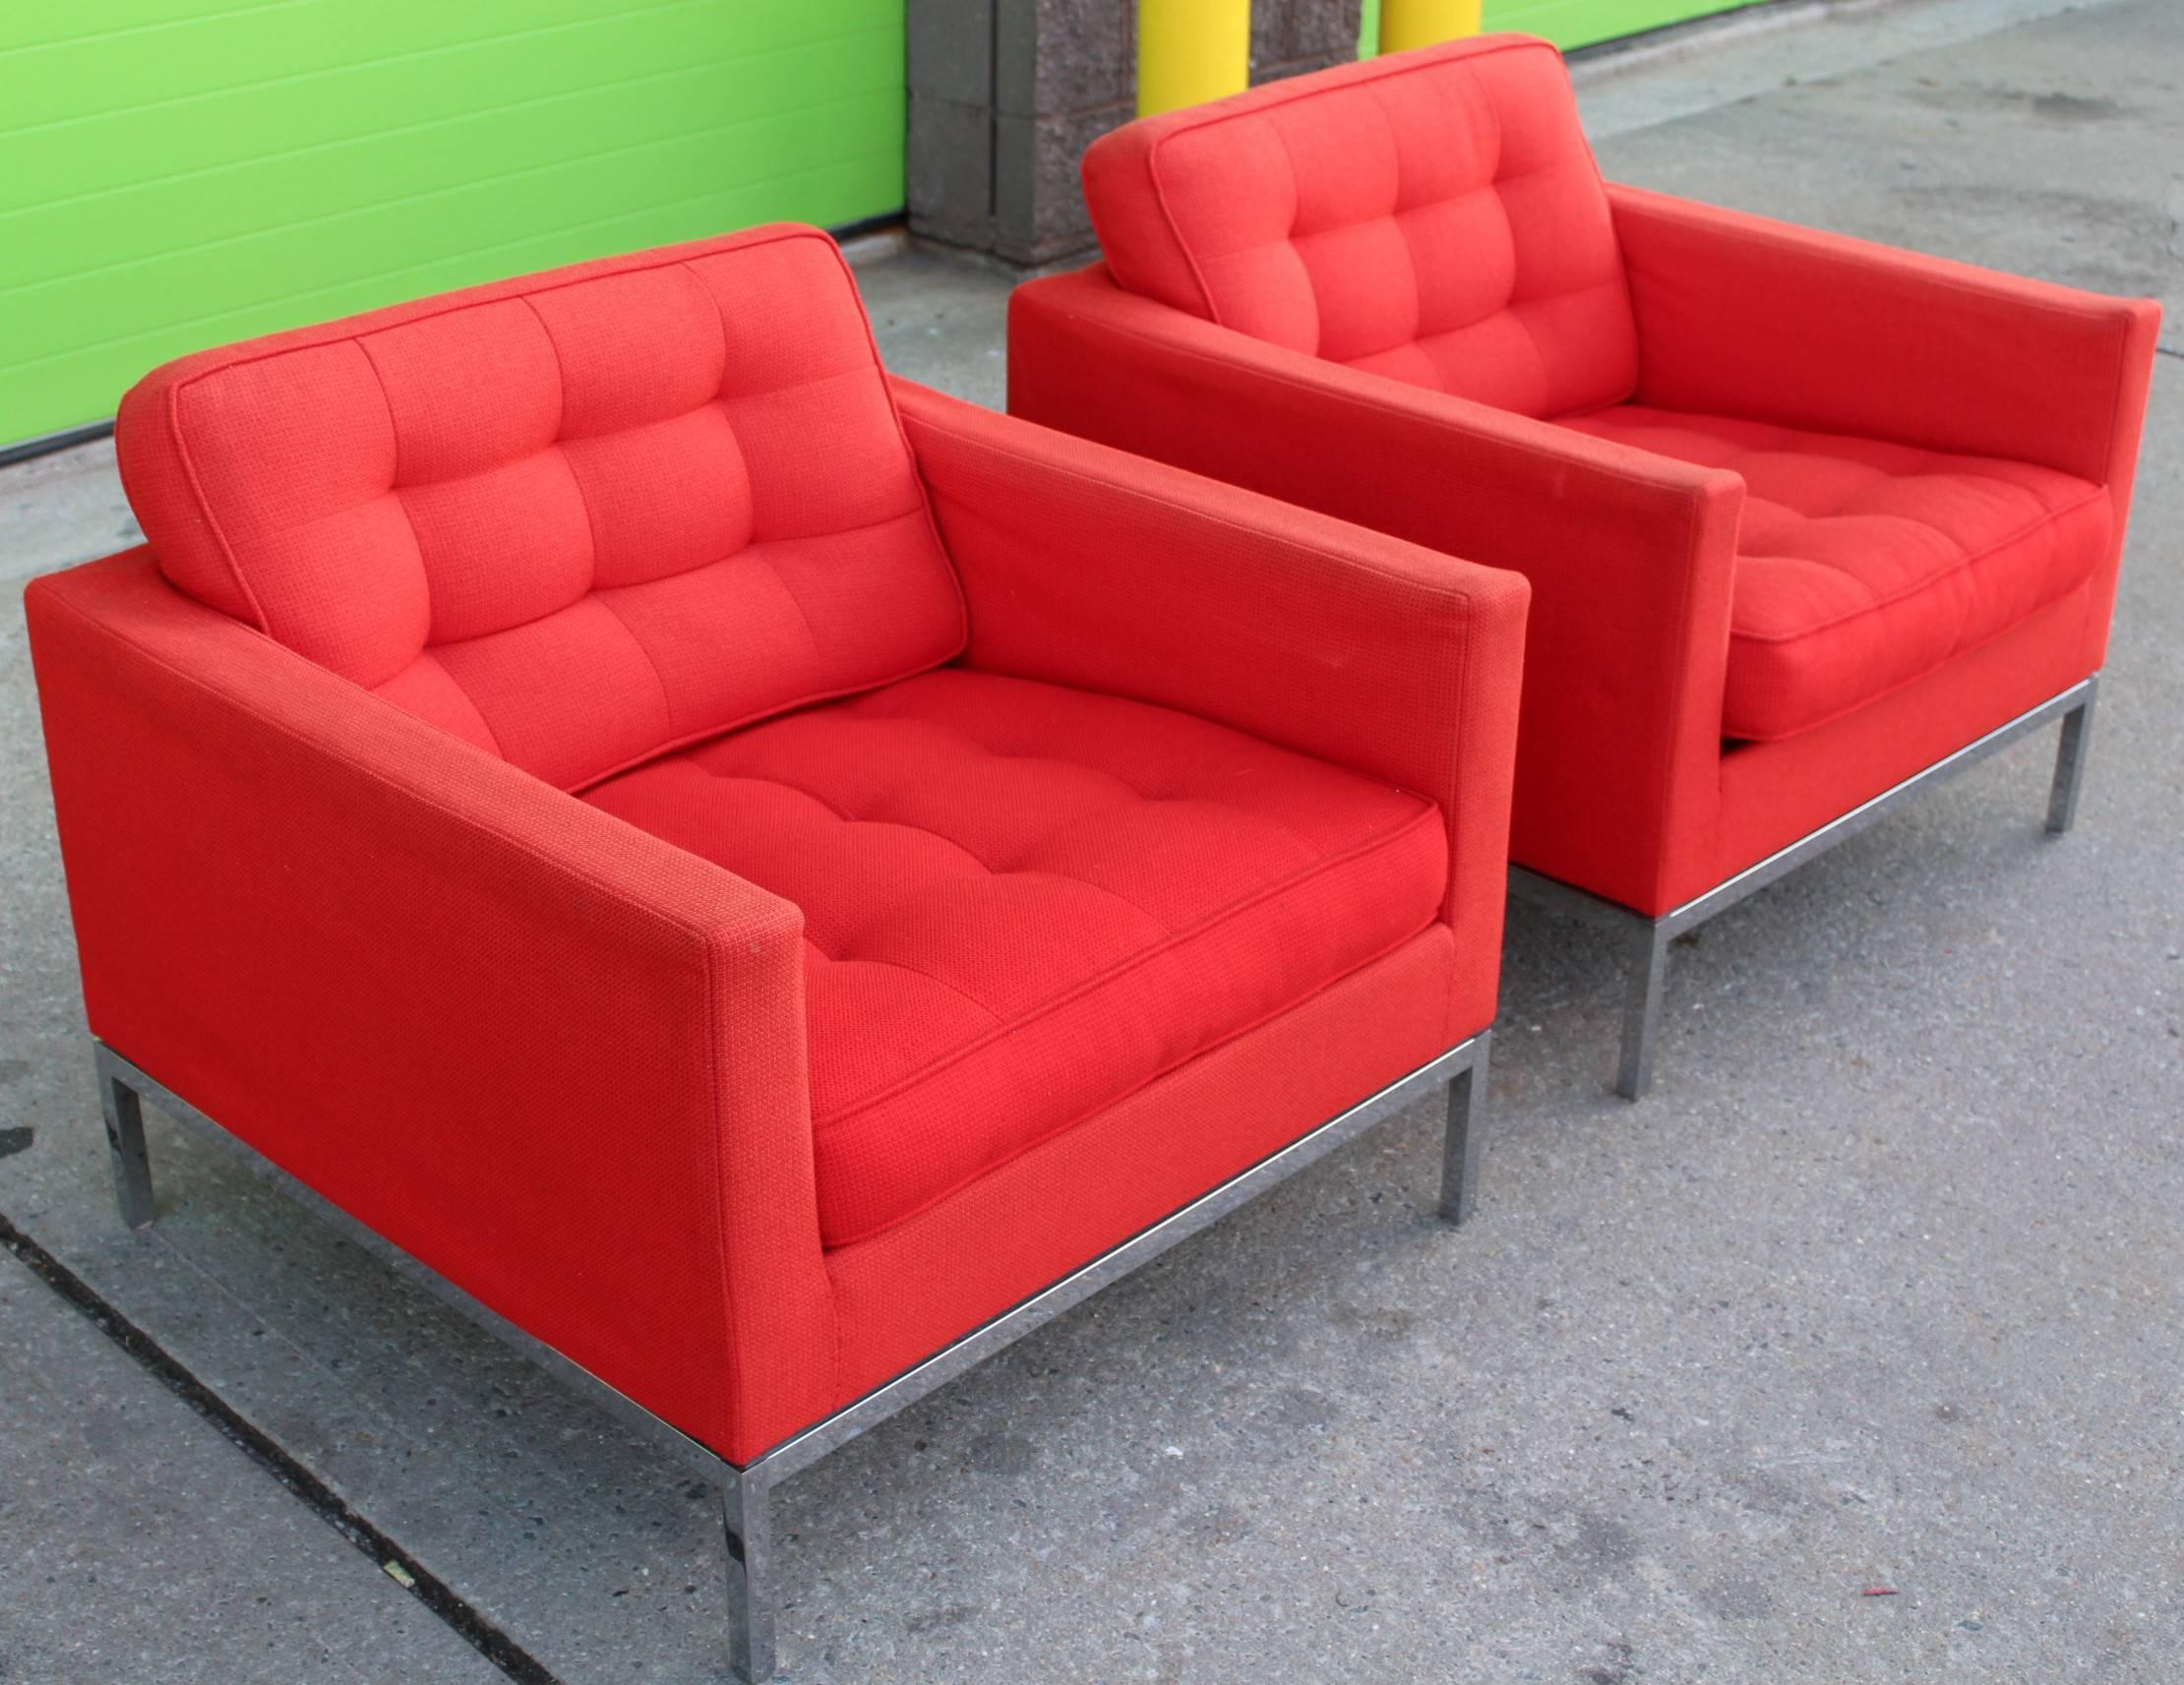 Two lounge chairs by Florence Knoll upholstered in red and made of chromed metal and wood. In good condition with no rips to upholstery but some signs of wear and staning. The cushions are removable. There is an original label and a sticker marked